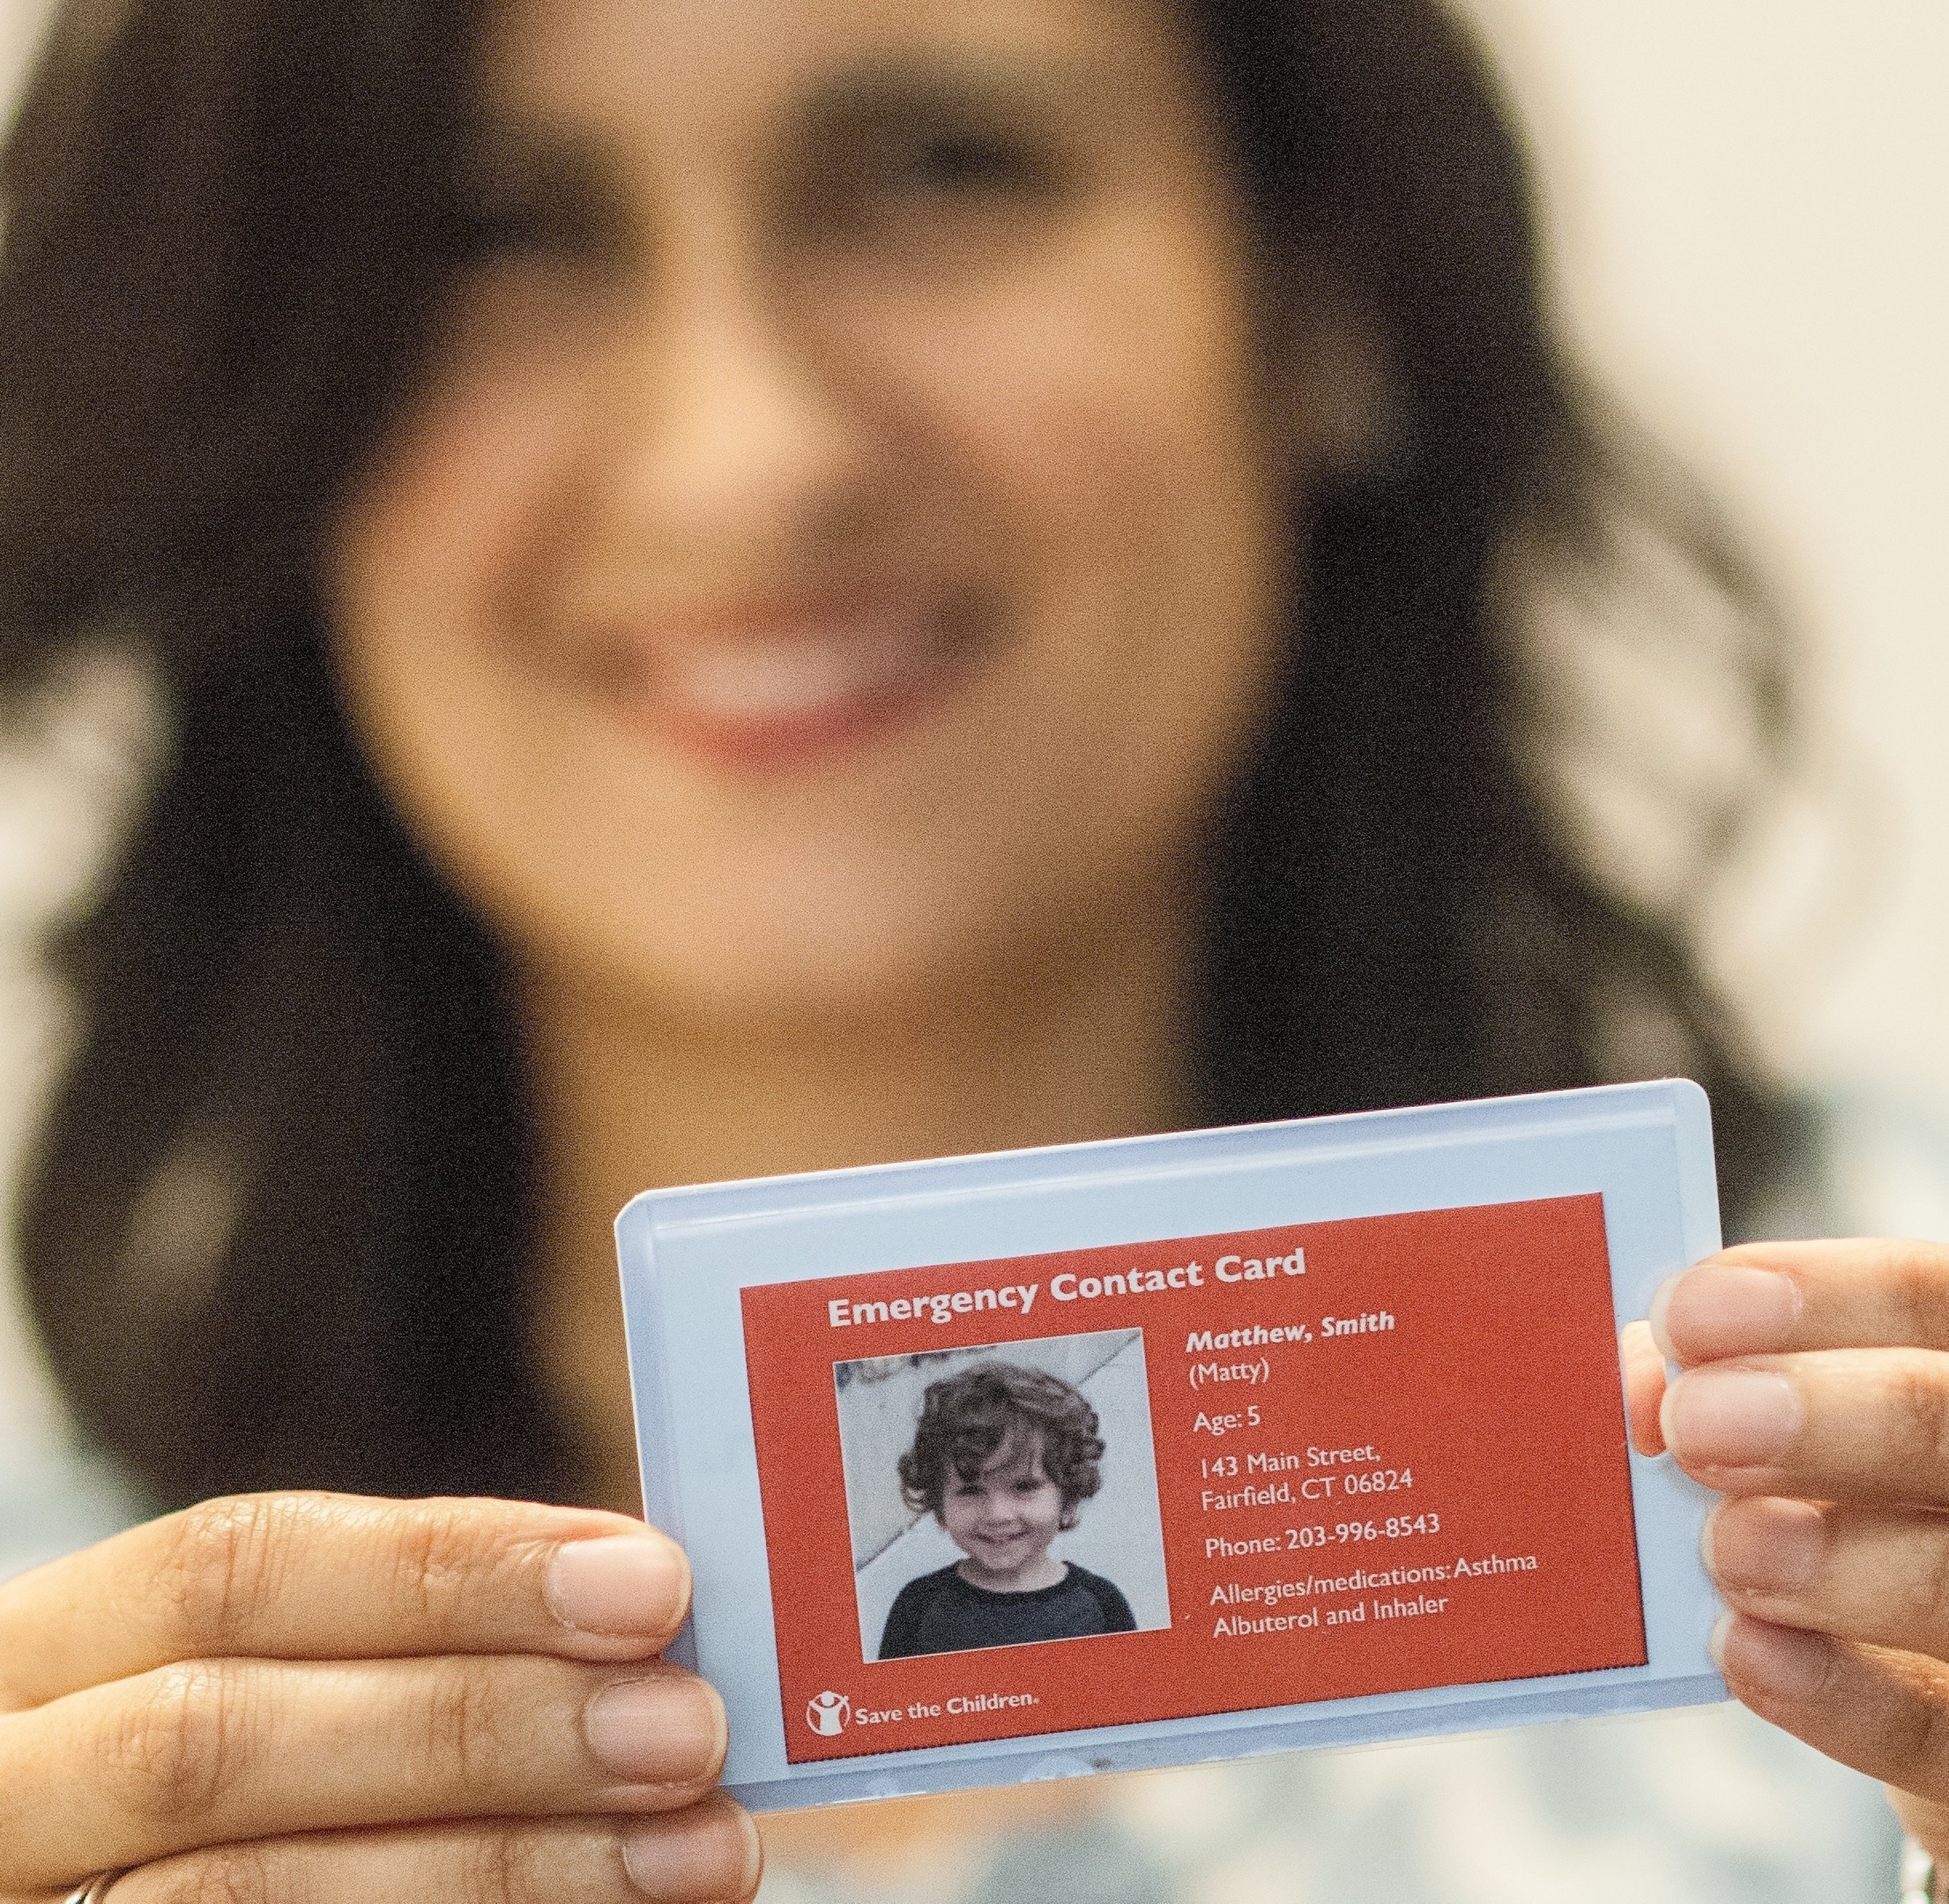 Save the Children's "Stay Connected" campaign calls on parents to create emergency contact cards. These can serve as a lifeline to children when disasters separate families. After Hurricane Katrina, there were 5,000 reports of missing children. Credit: Susan Warner/Save the Children